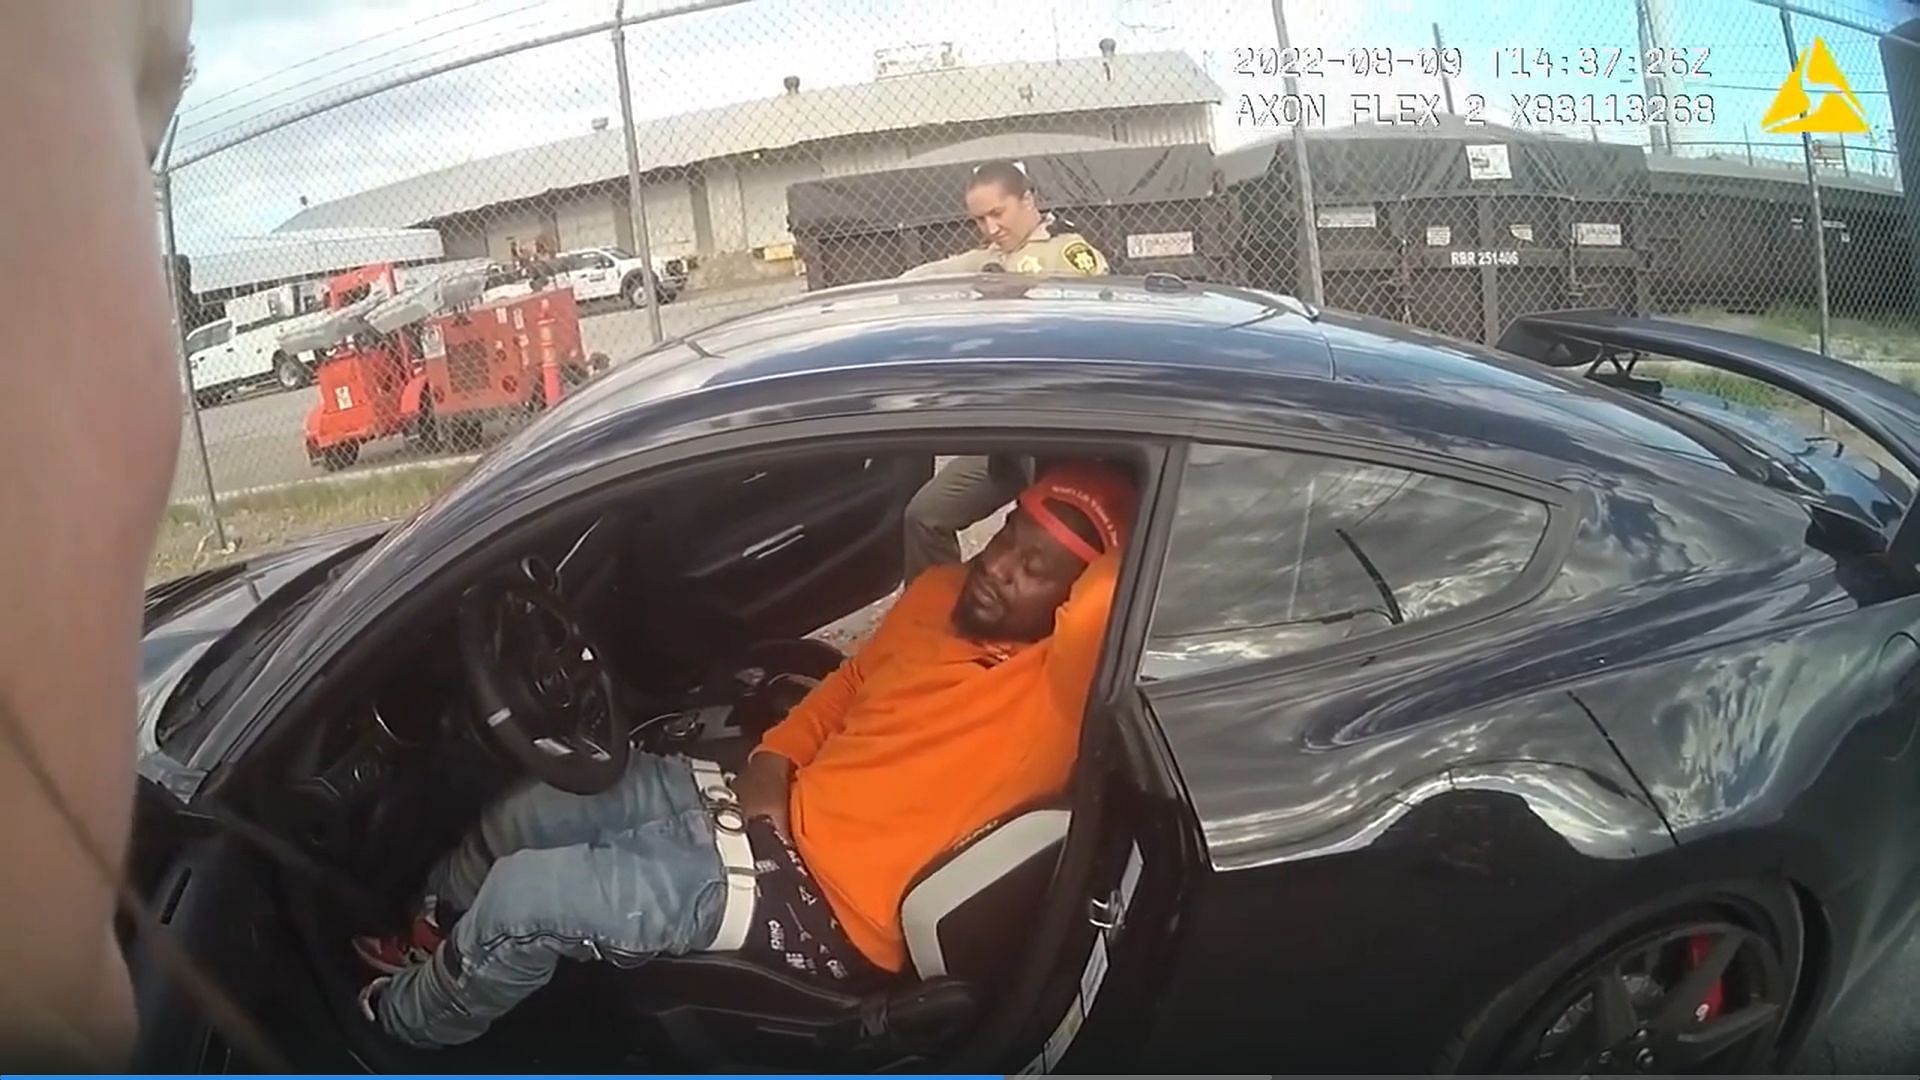 Marshawn Lynch in his car being questioned by police.